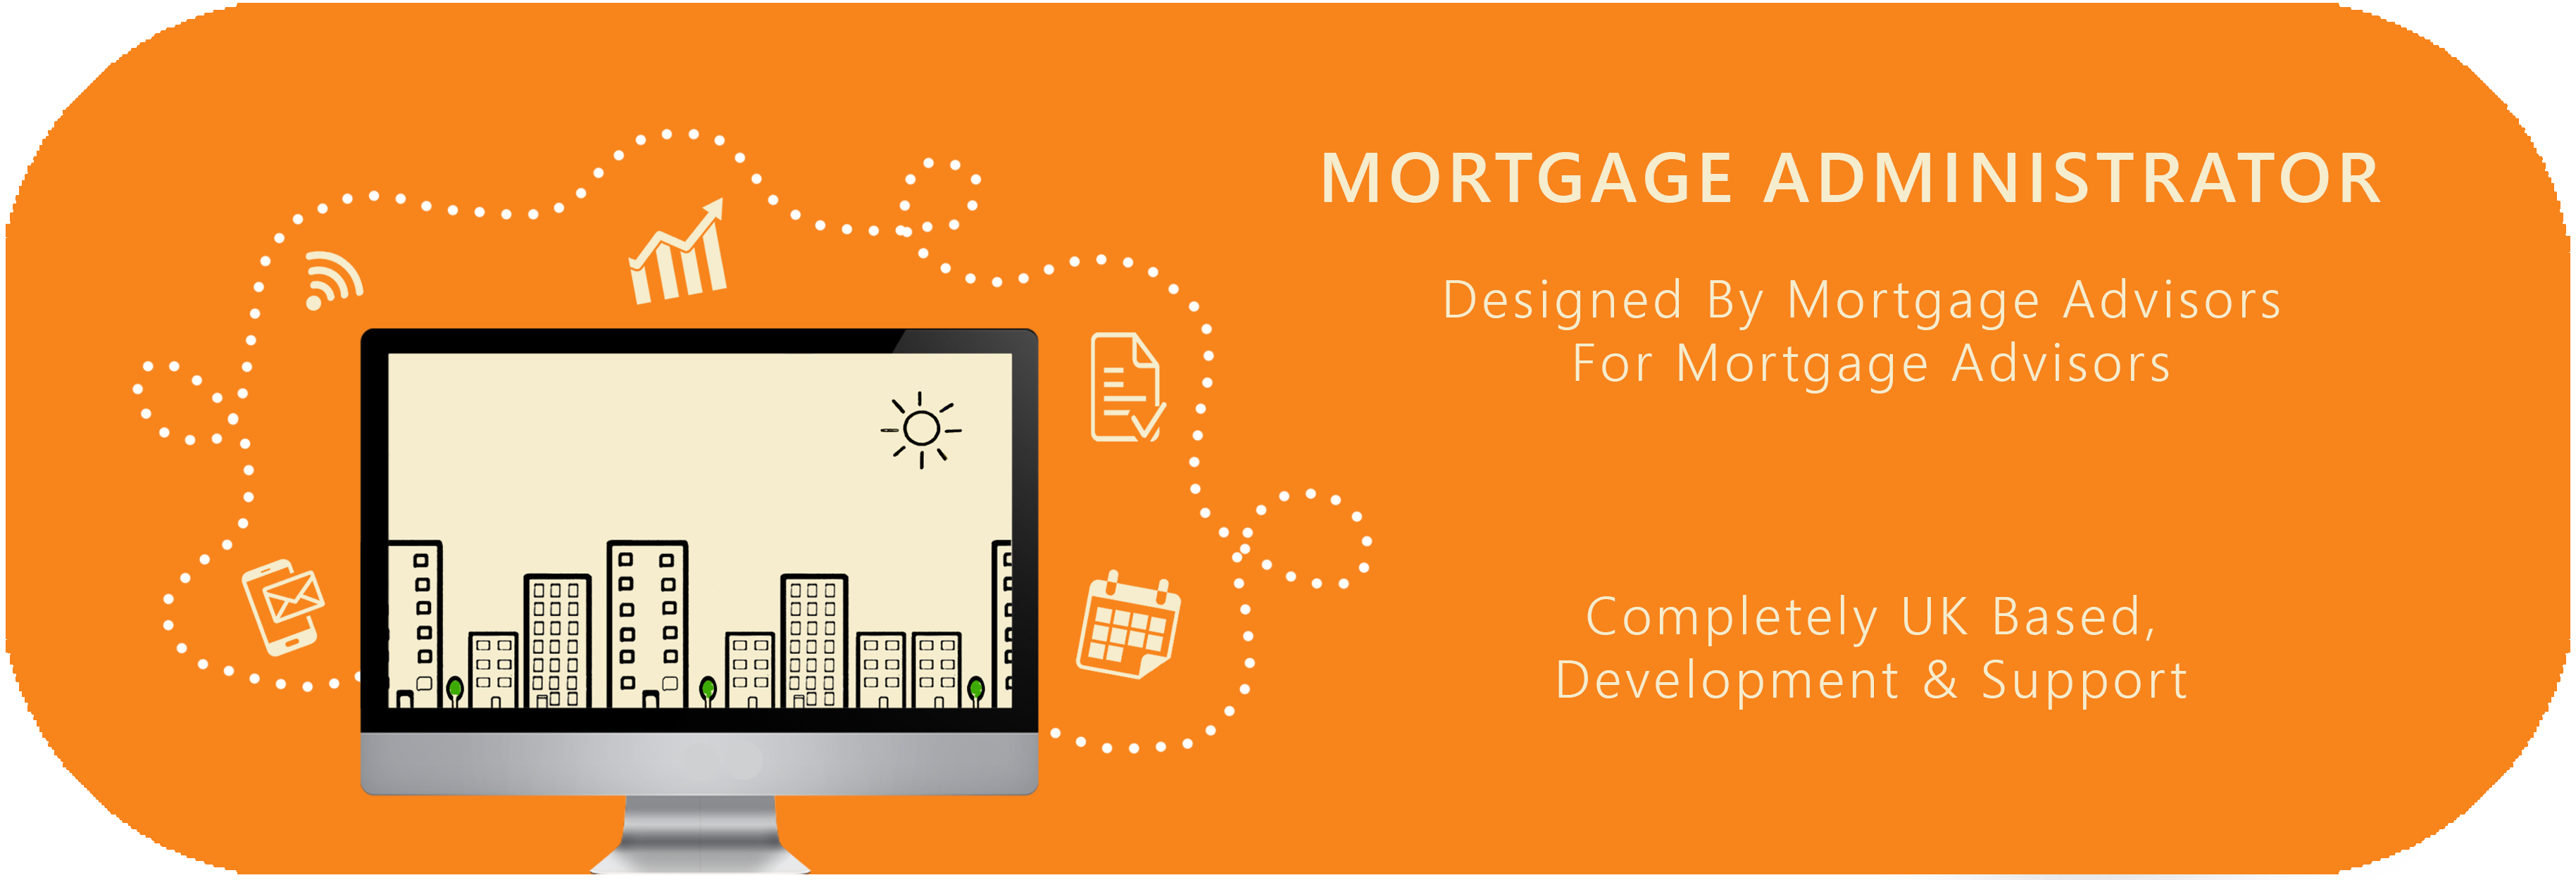 Mortgage Administrator Software, case tracking and compliance solution designed for Mortgage Brokers and Mortgage Advisors across the UK. 